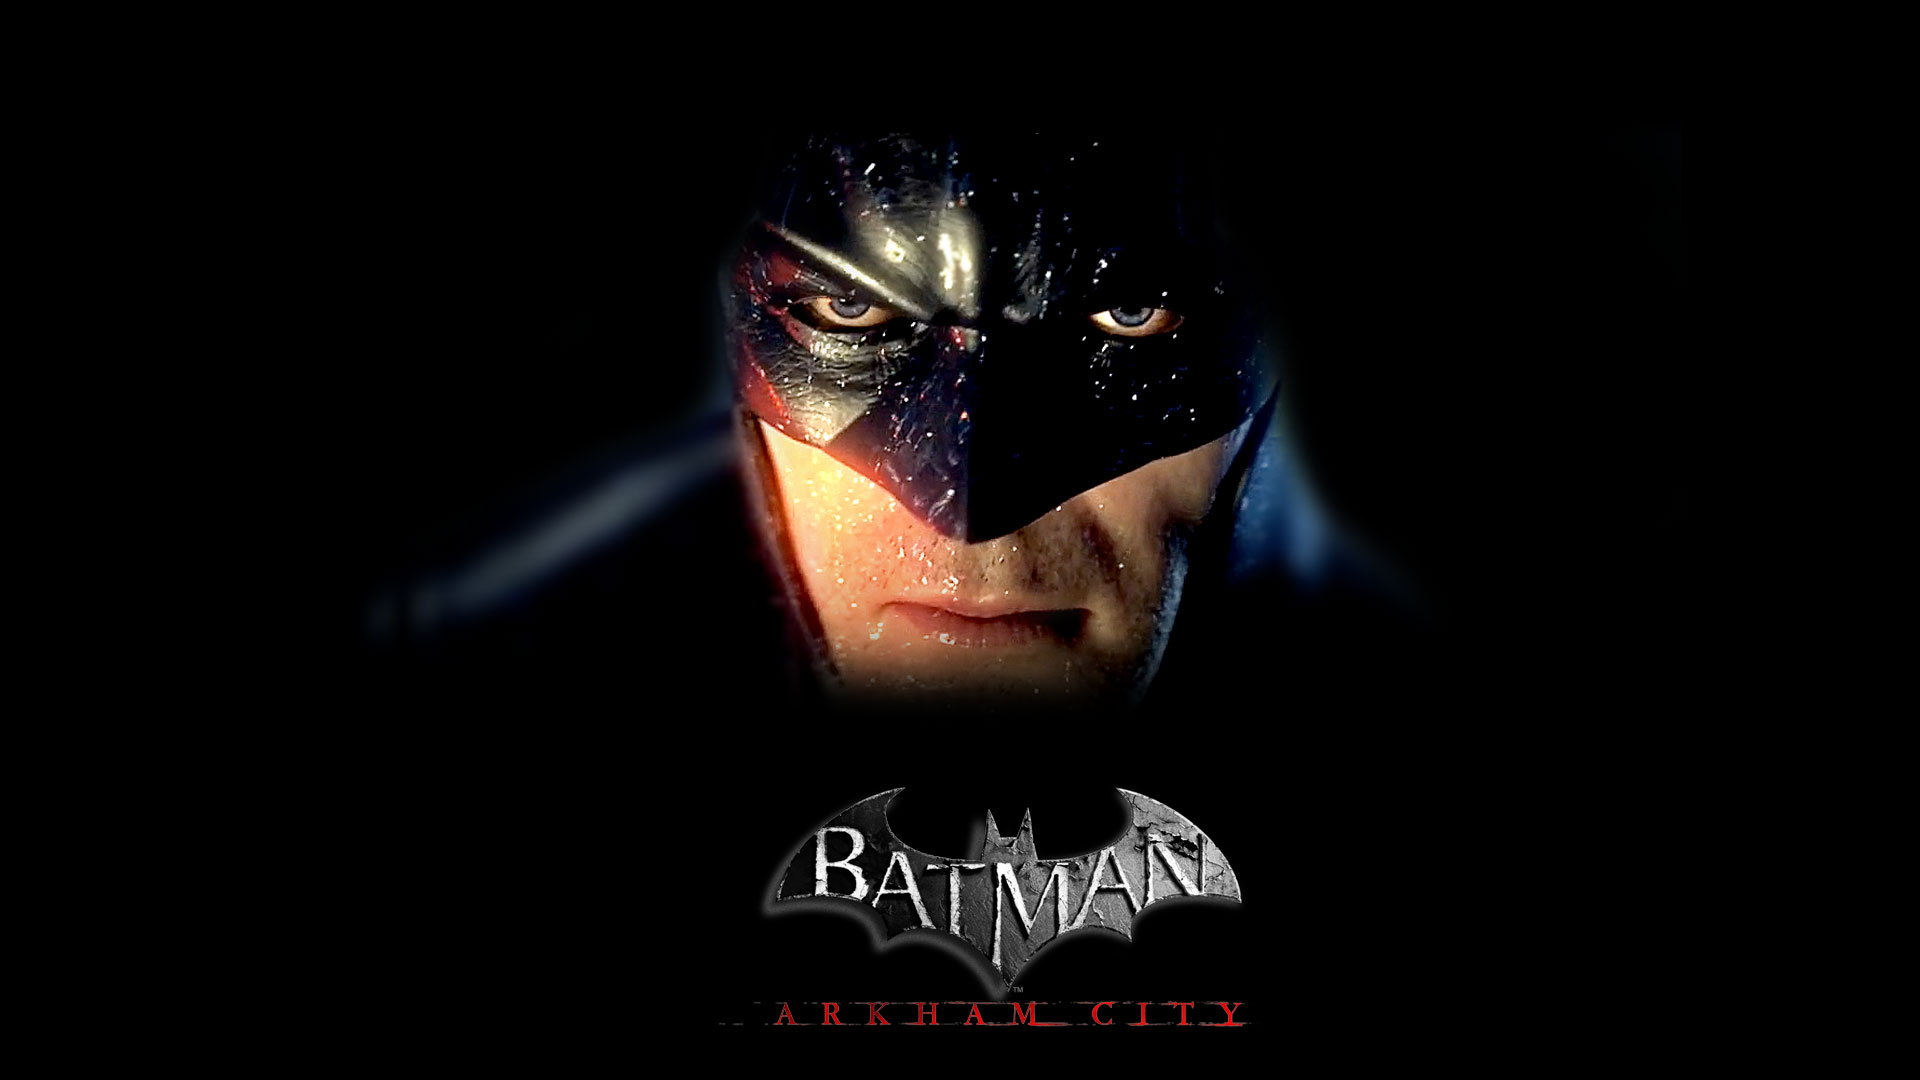 Batman Arkham City Wallpapers in HD High Resolution Page